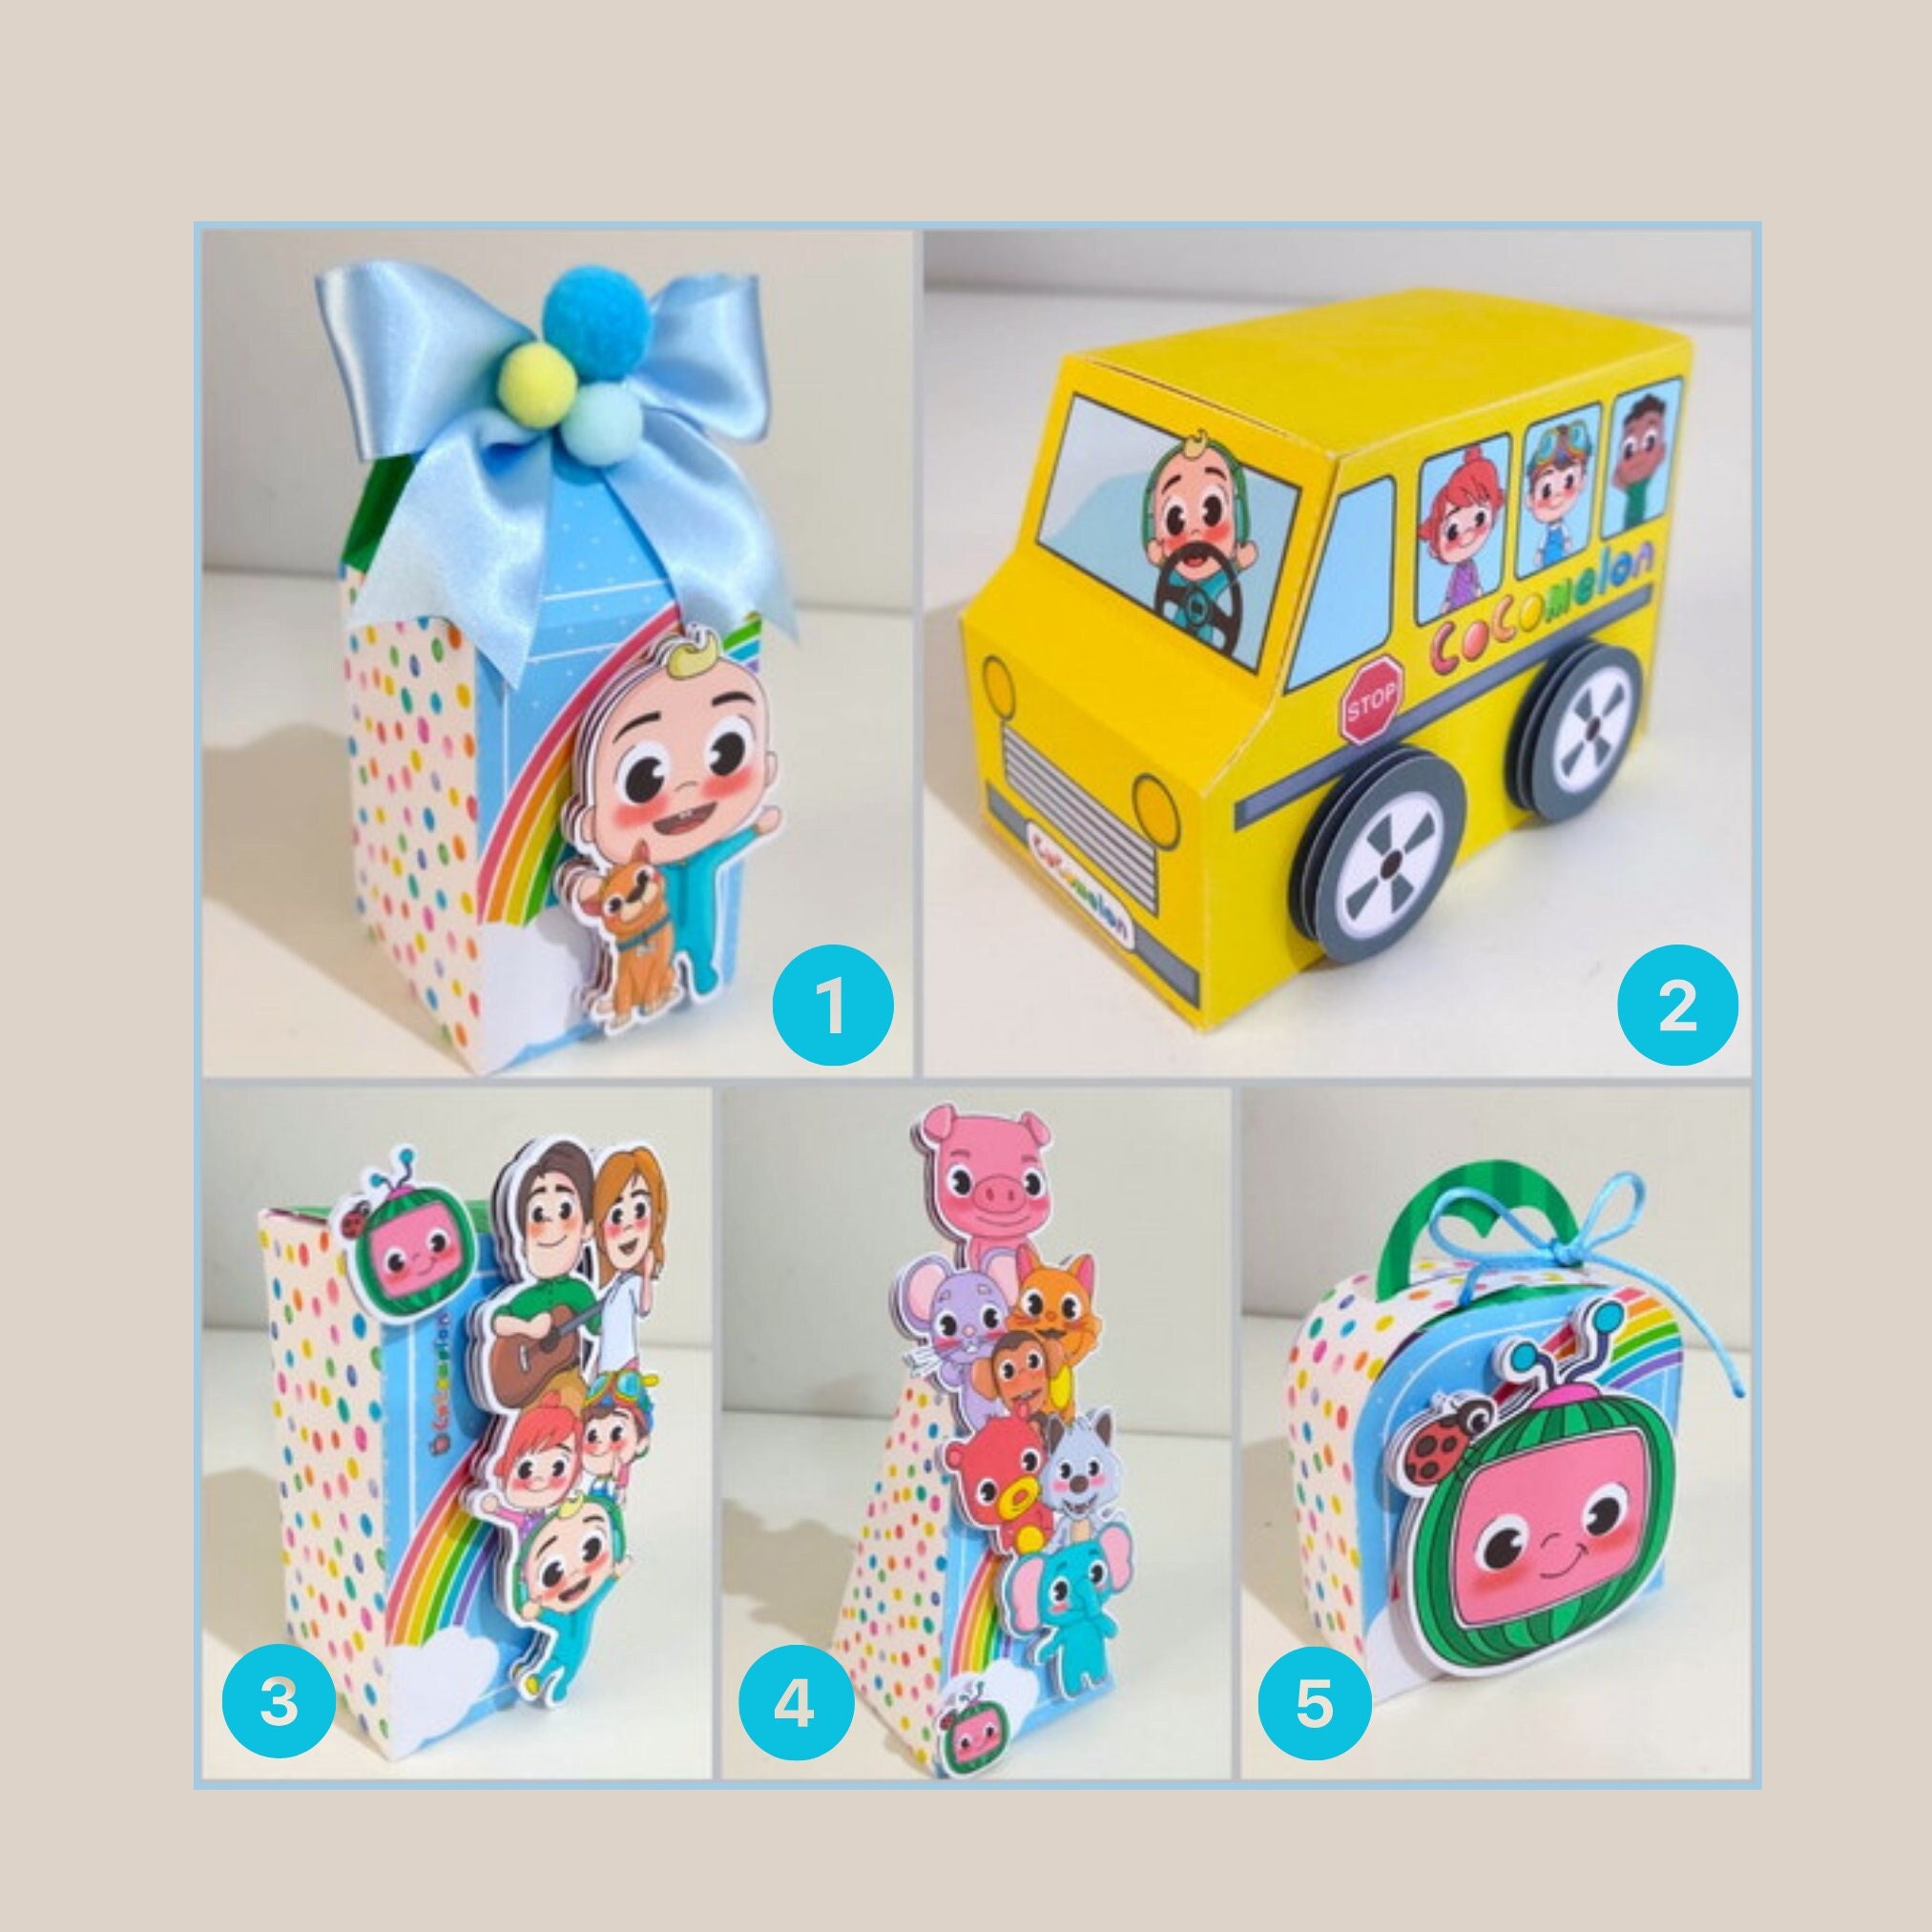 CoComelon Lunchbox Playset $10